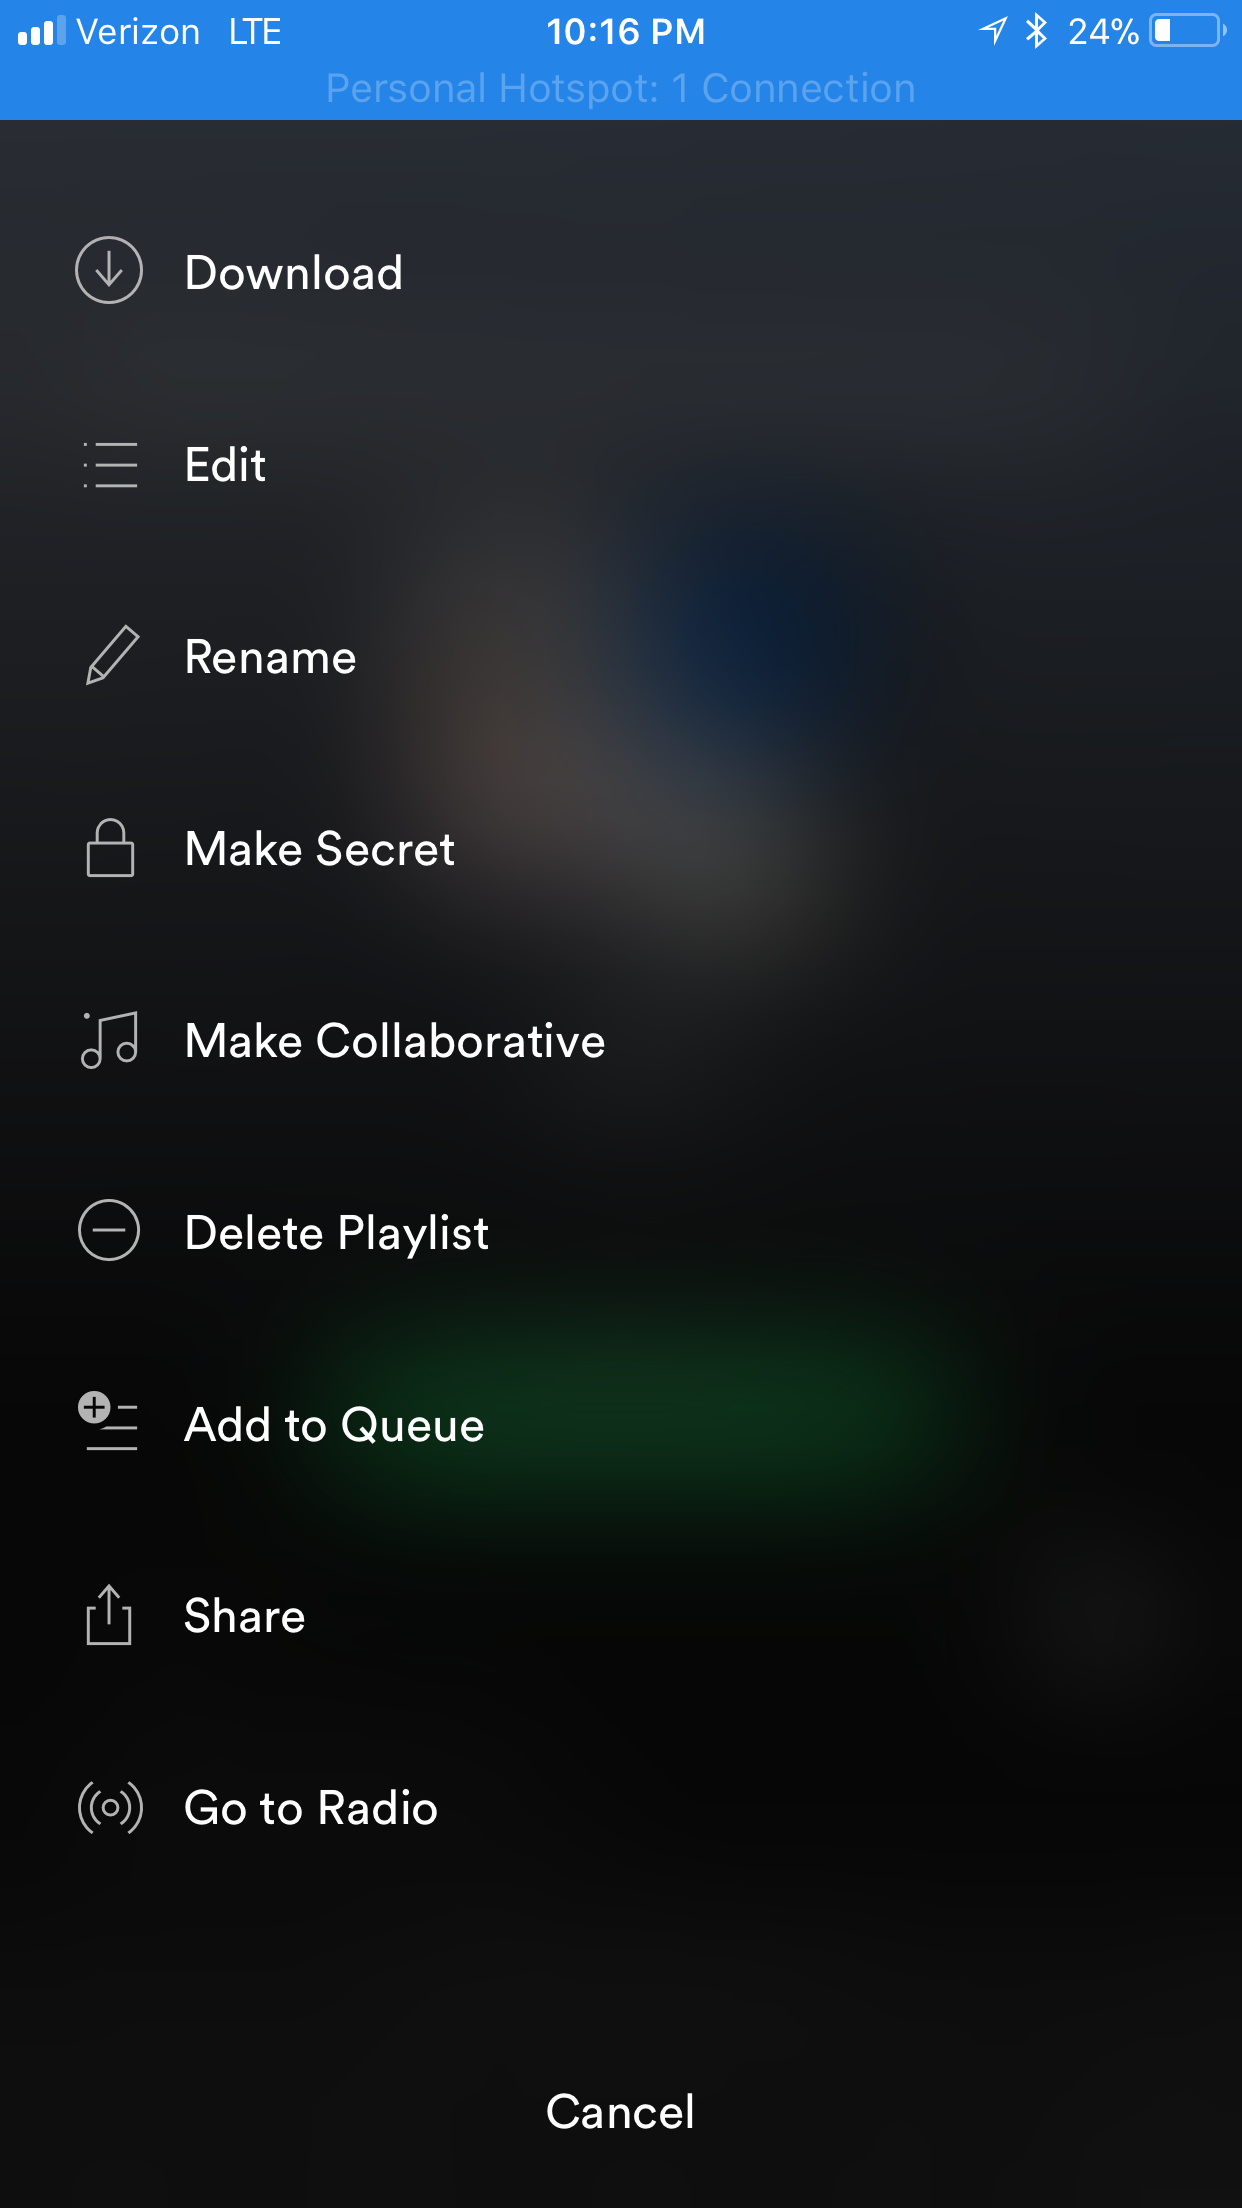 Solved: Playlist Customized Covers - The Spotify Community